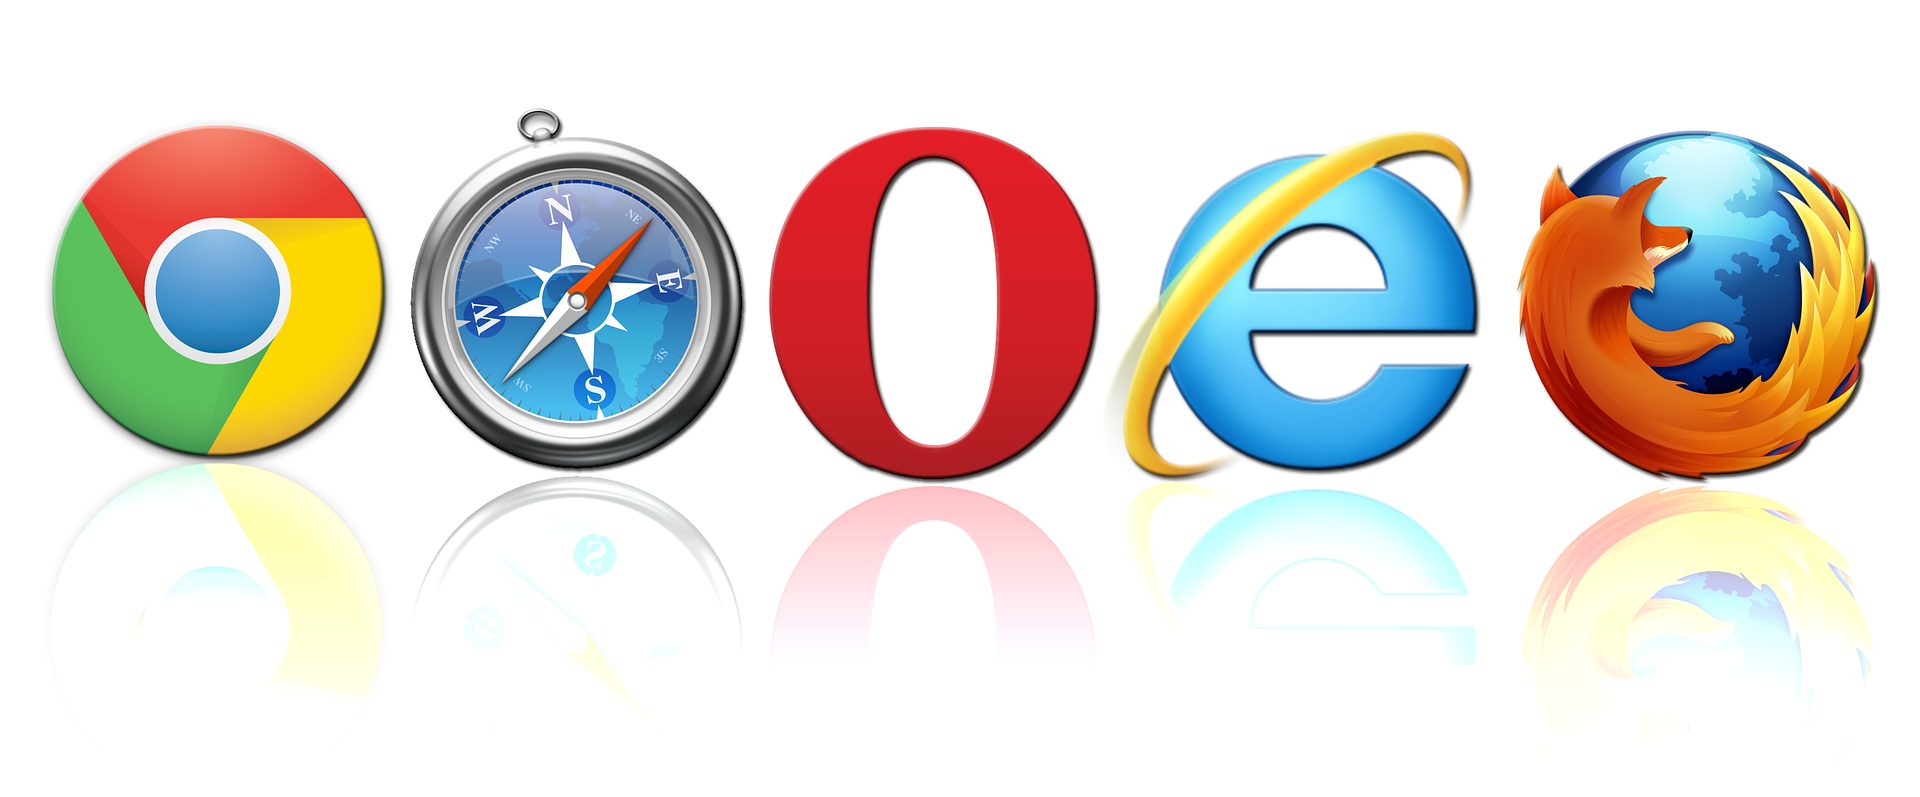 picture of the major web browser logos